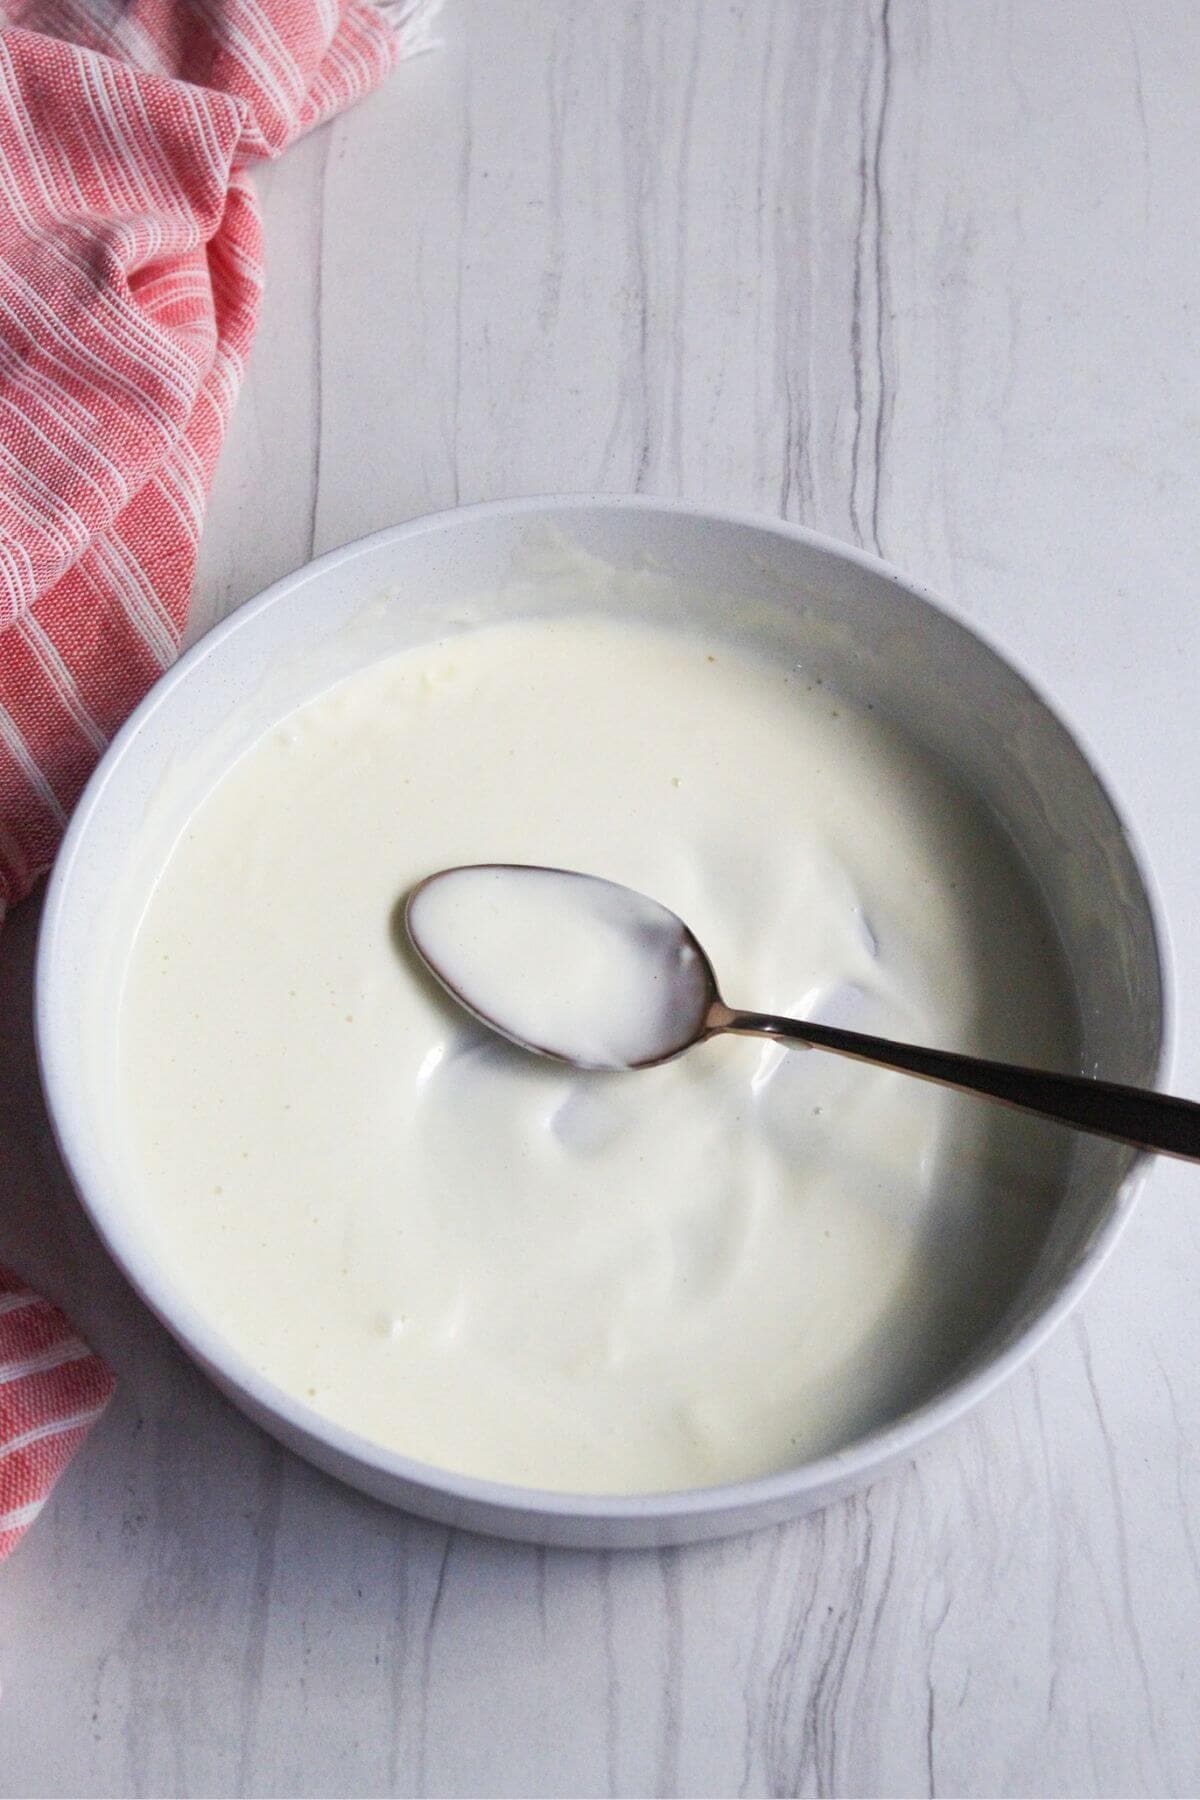 A bowl of mayonnaise based dressing with a spoon in it.